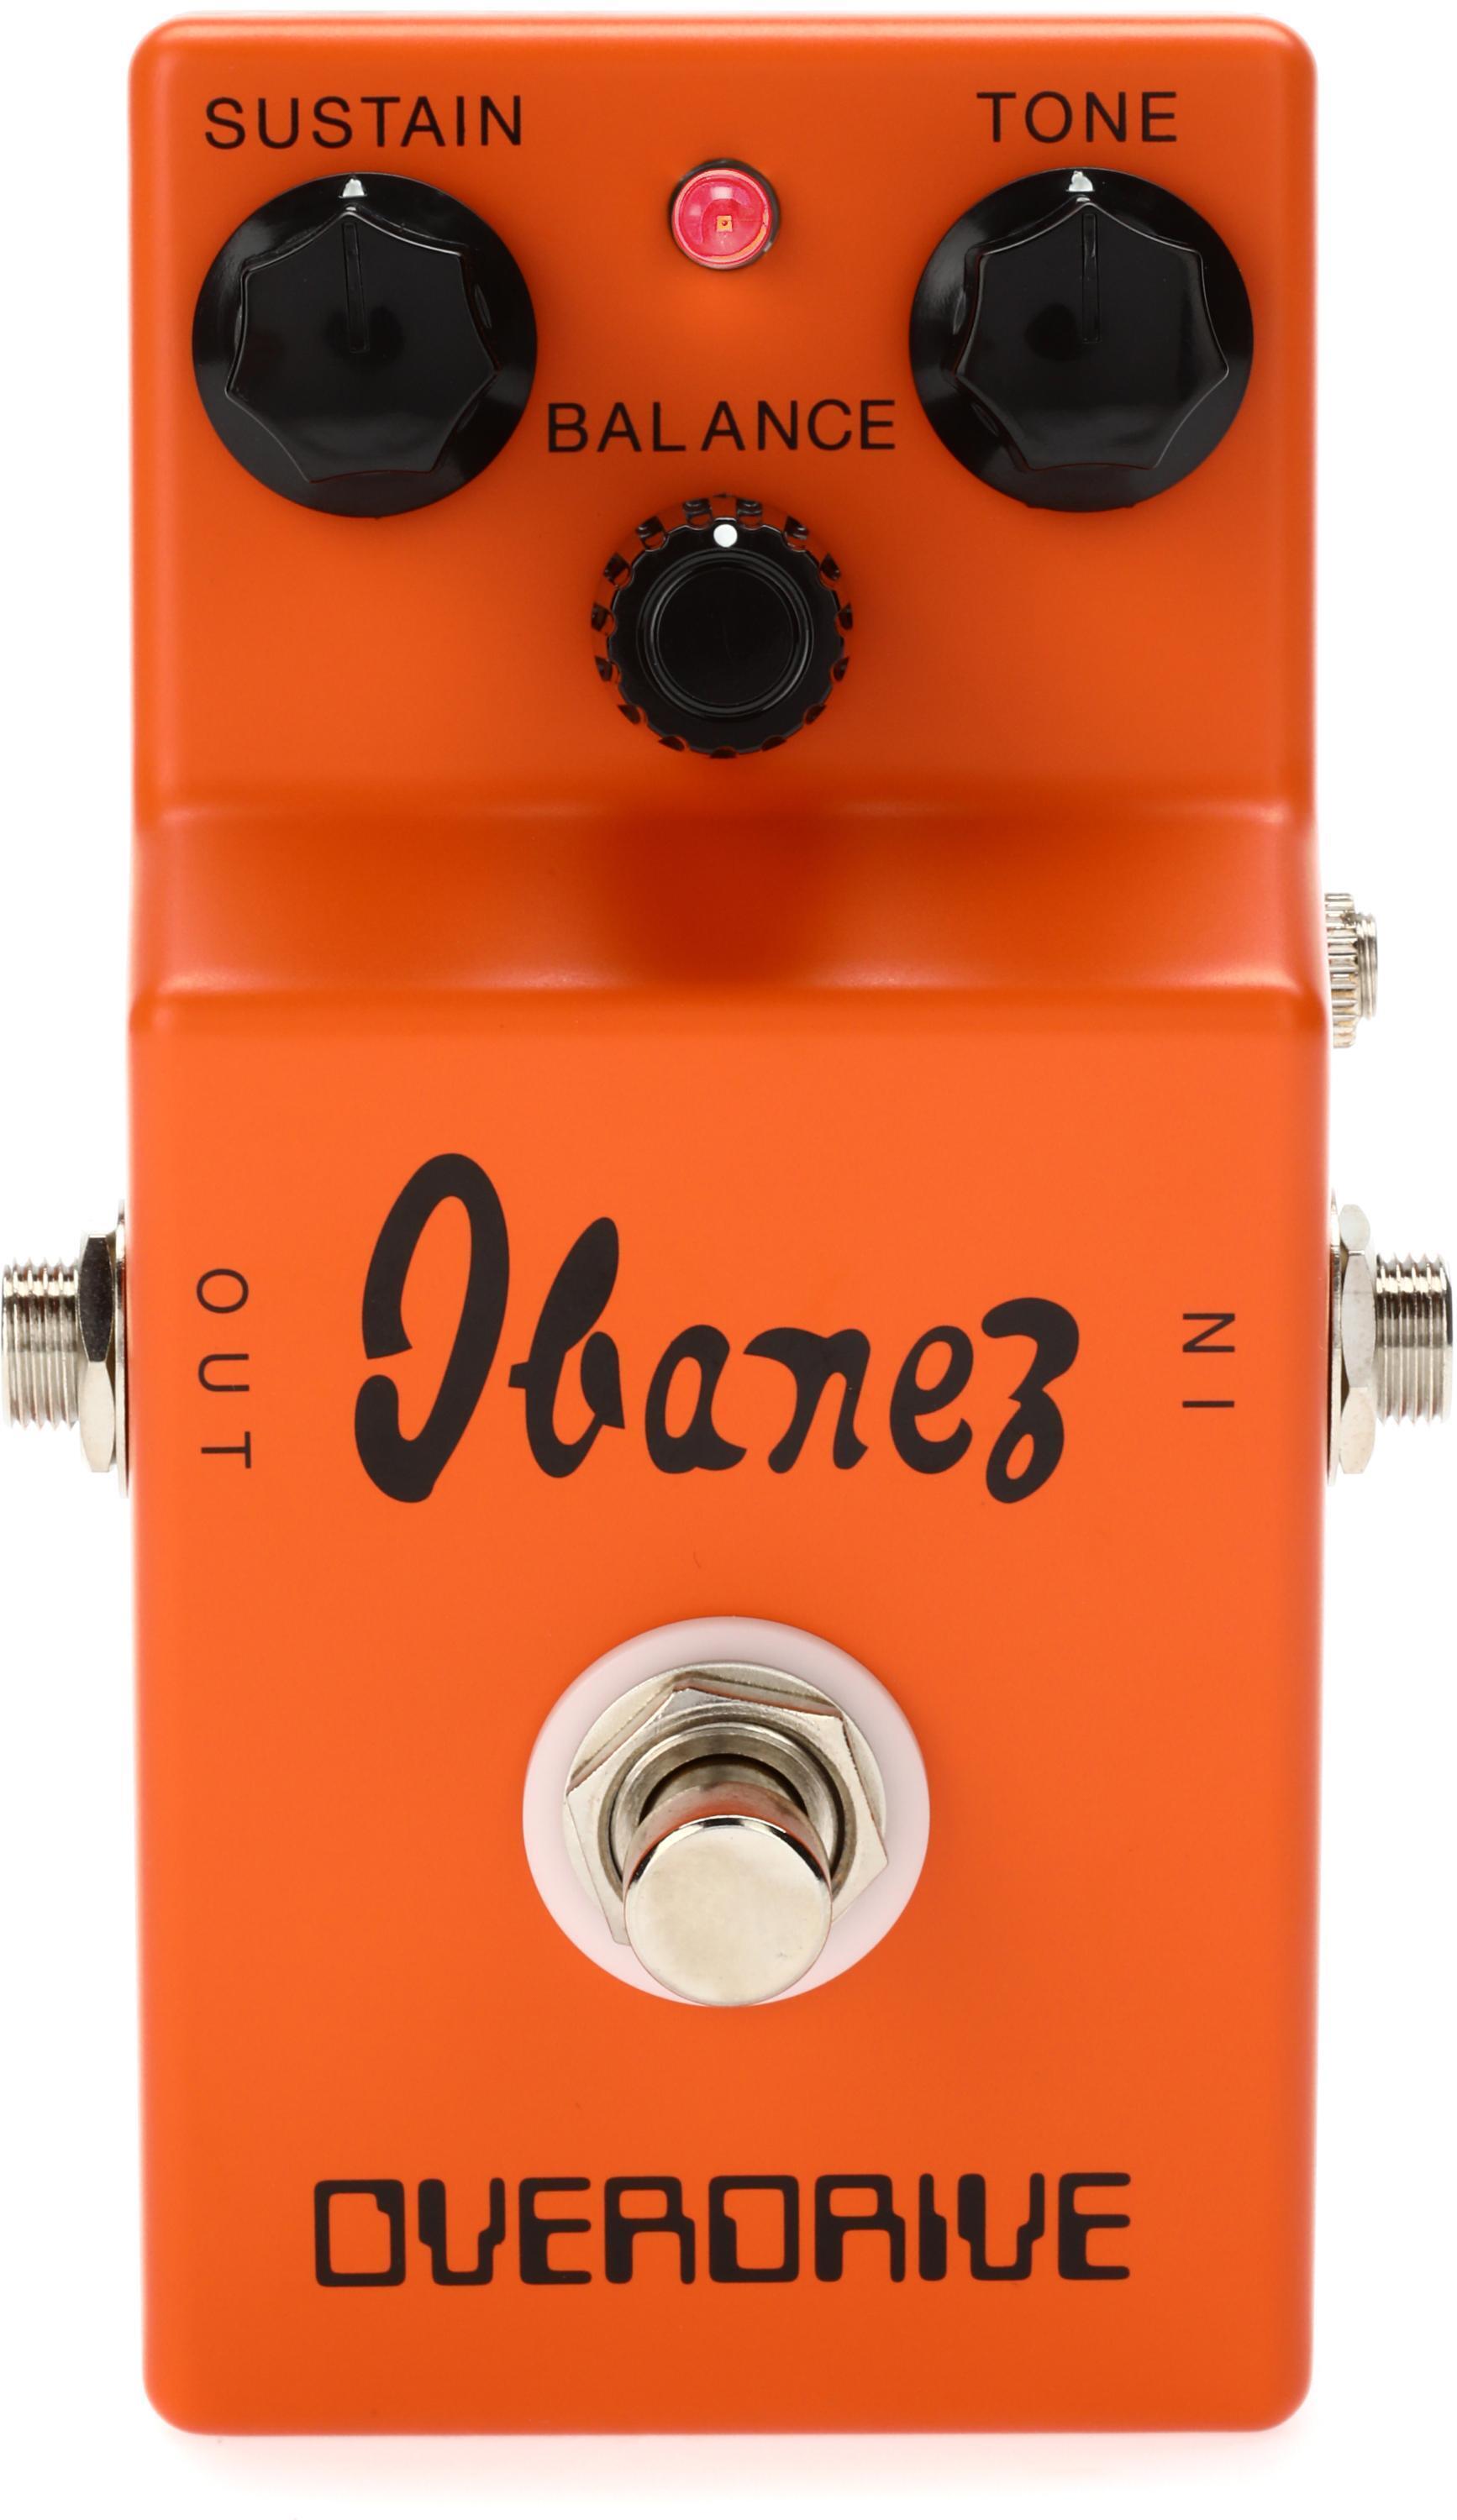 Ibanez OD850 Limited Edition Overdrive Reissue Pedal